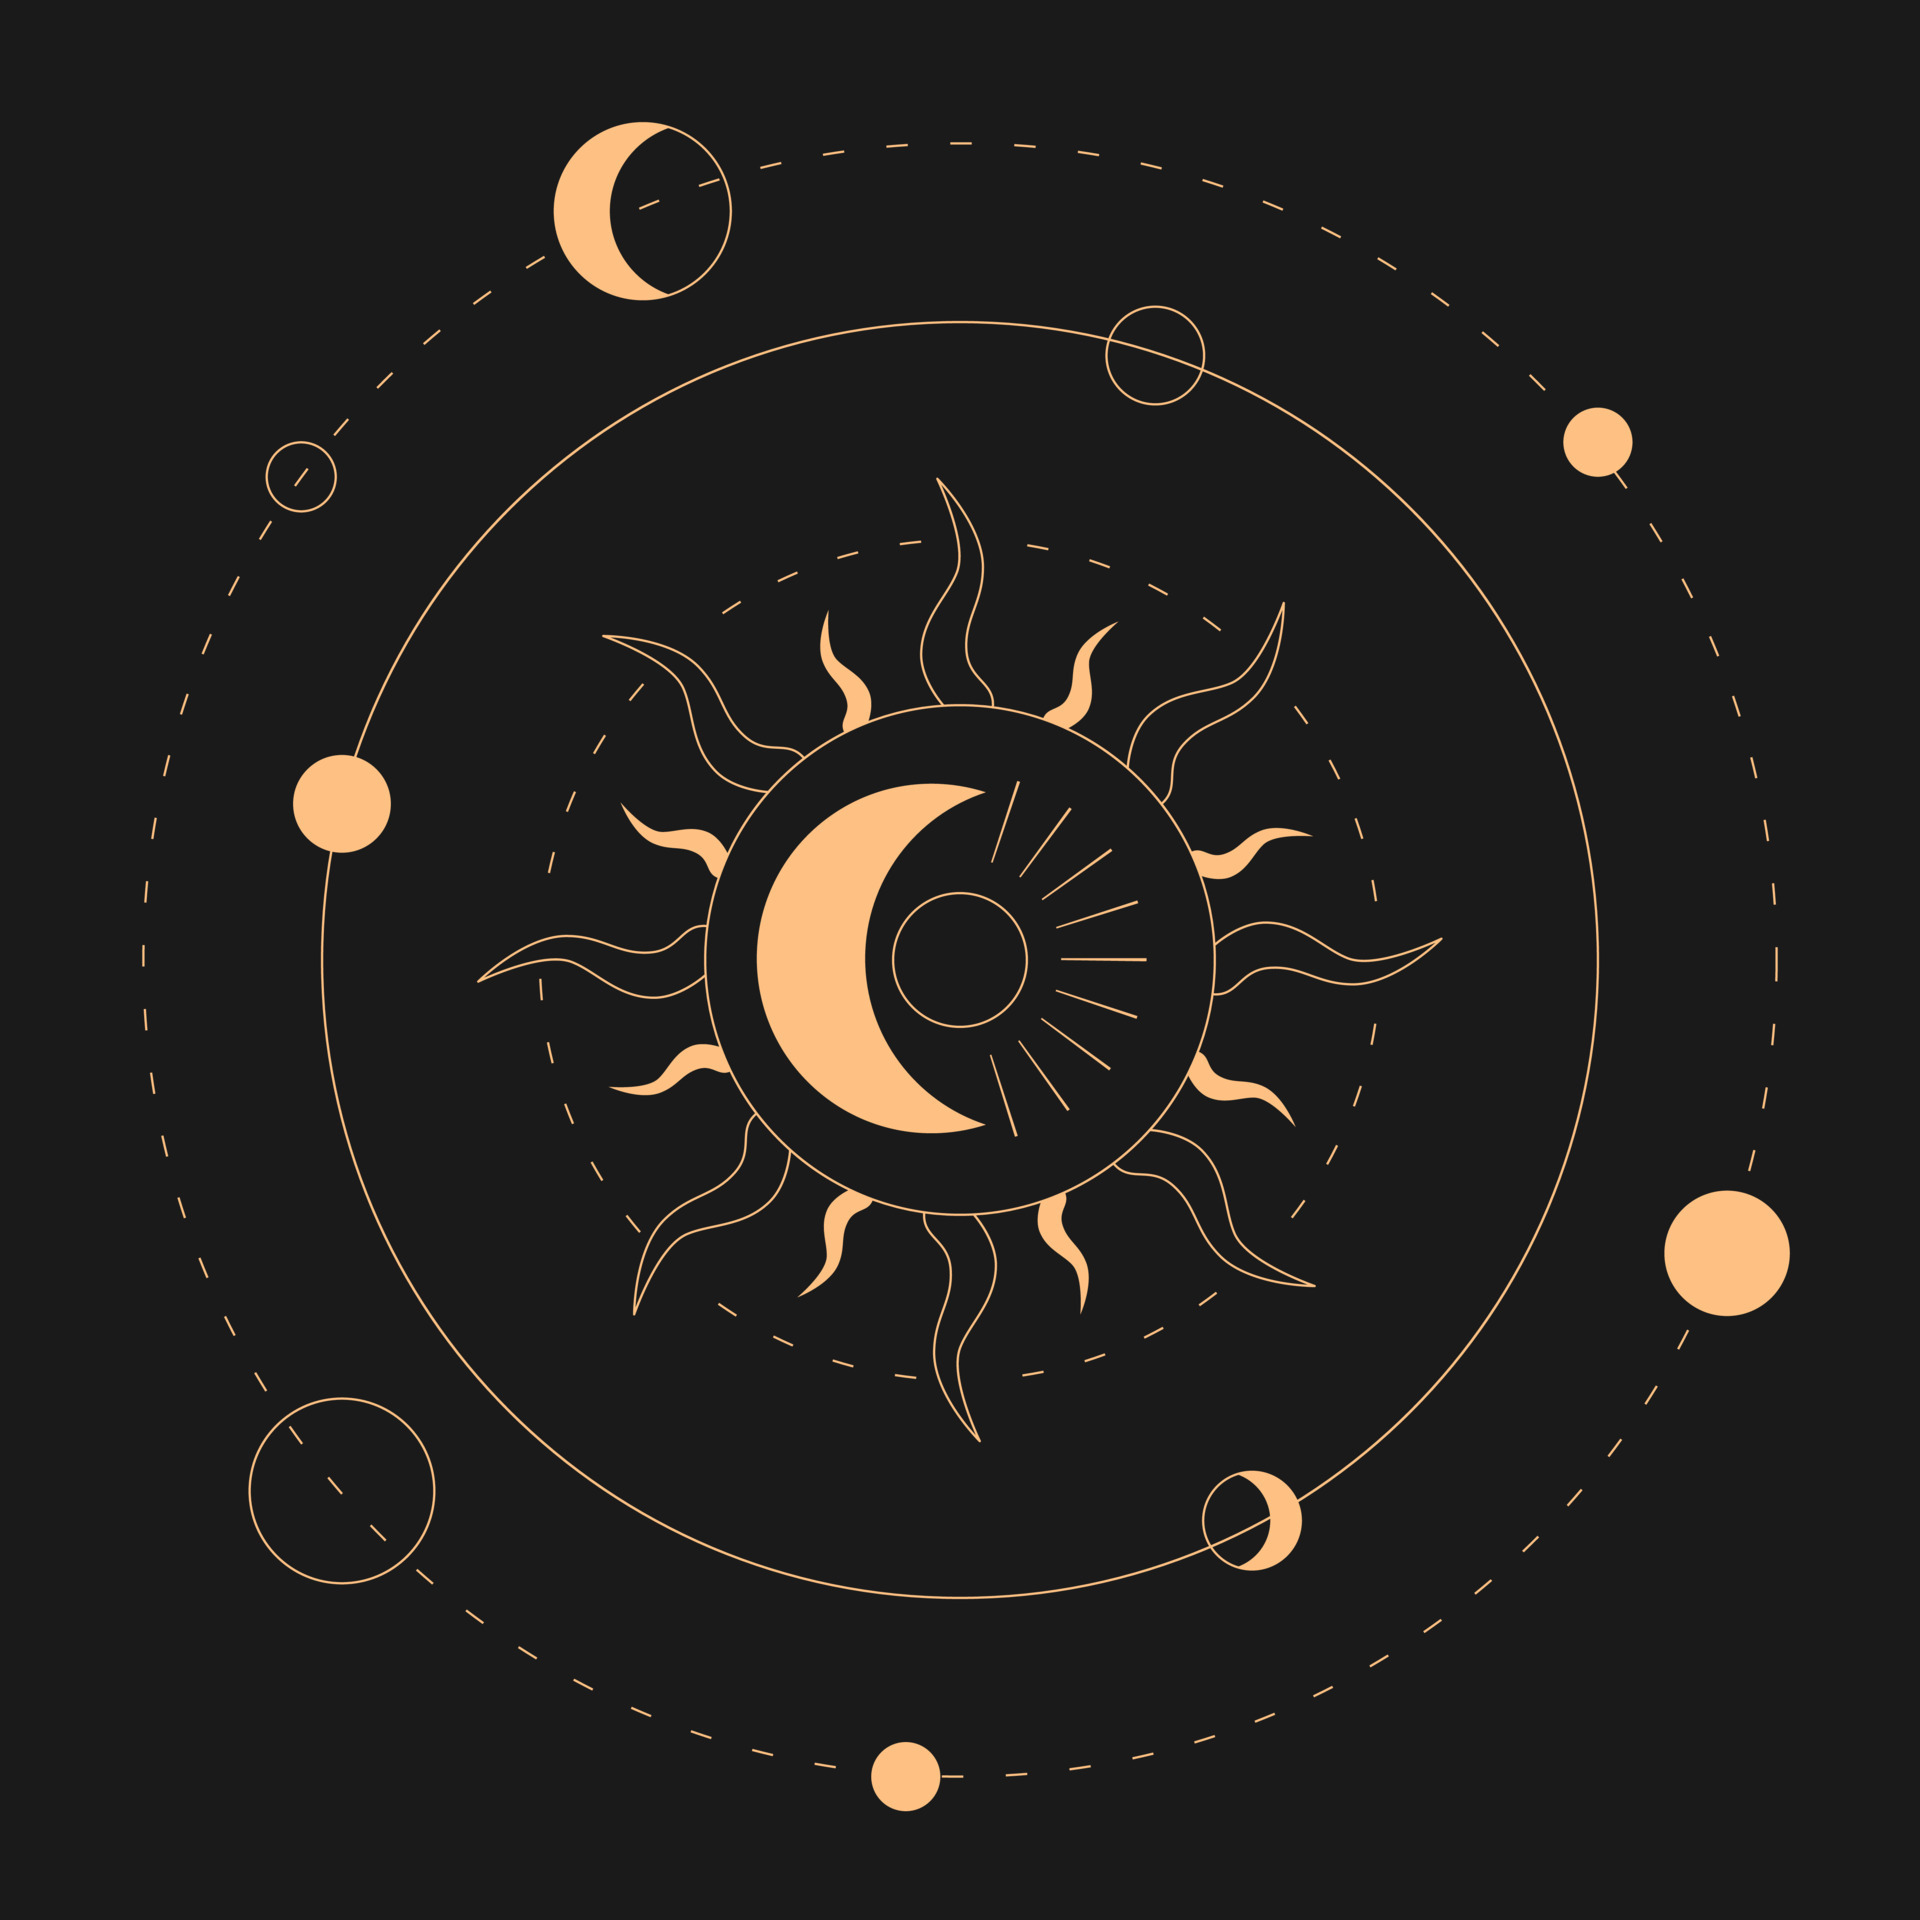 V. Staff Celestial-sun-and-moon-magical-banner-for-astrology-celestial-alchemy-device-of-the-universe-crescent-sun-with-the-moon-and-planets-on-a-black-background-esoteric-illustration-vector